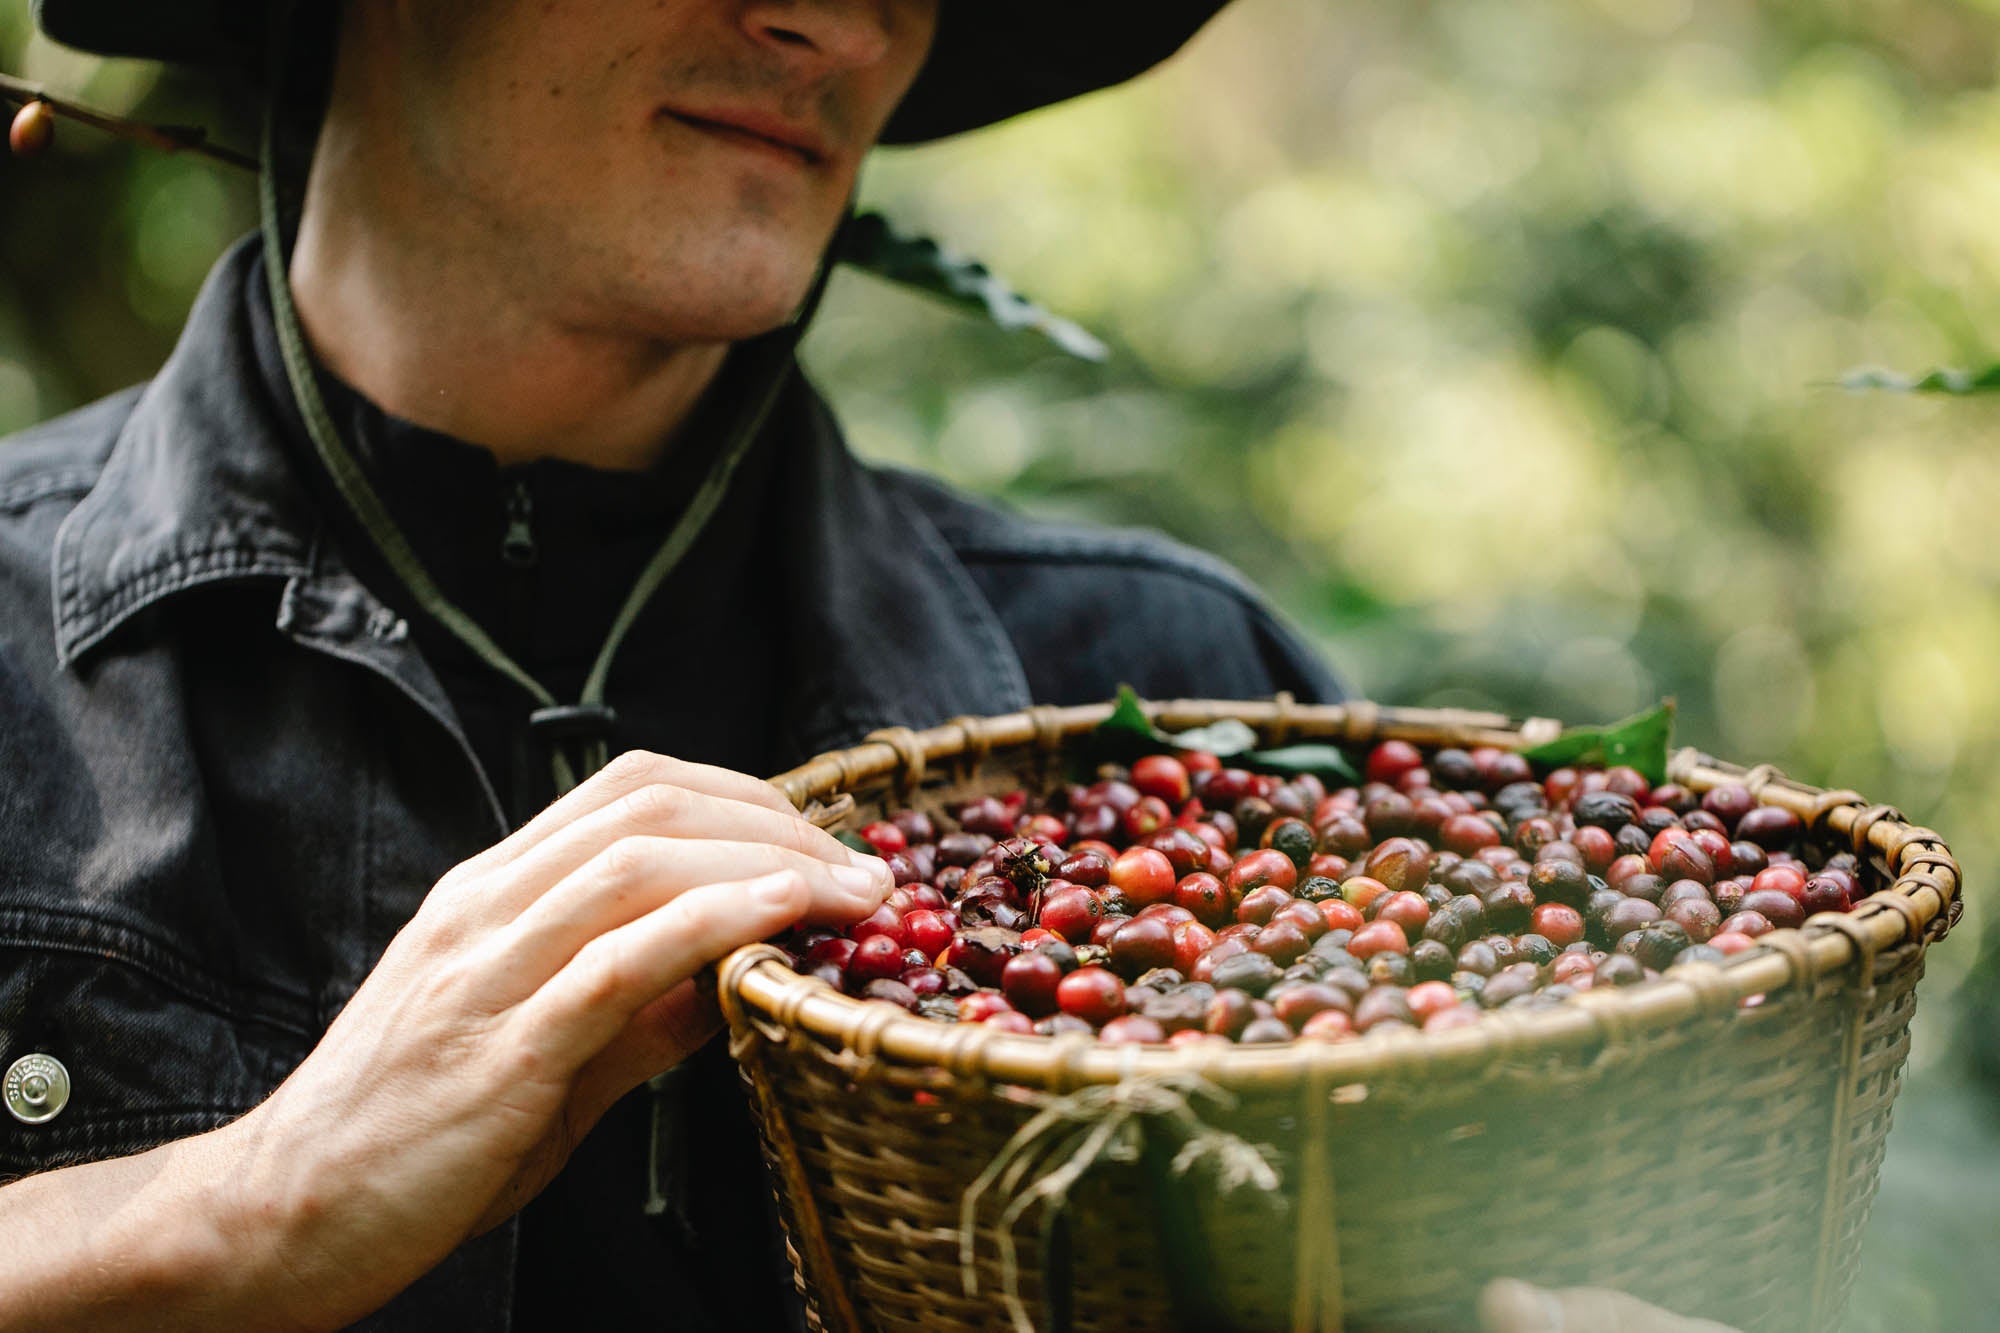 coffee farm with cherries in a basket